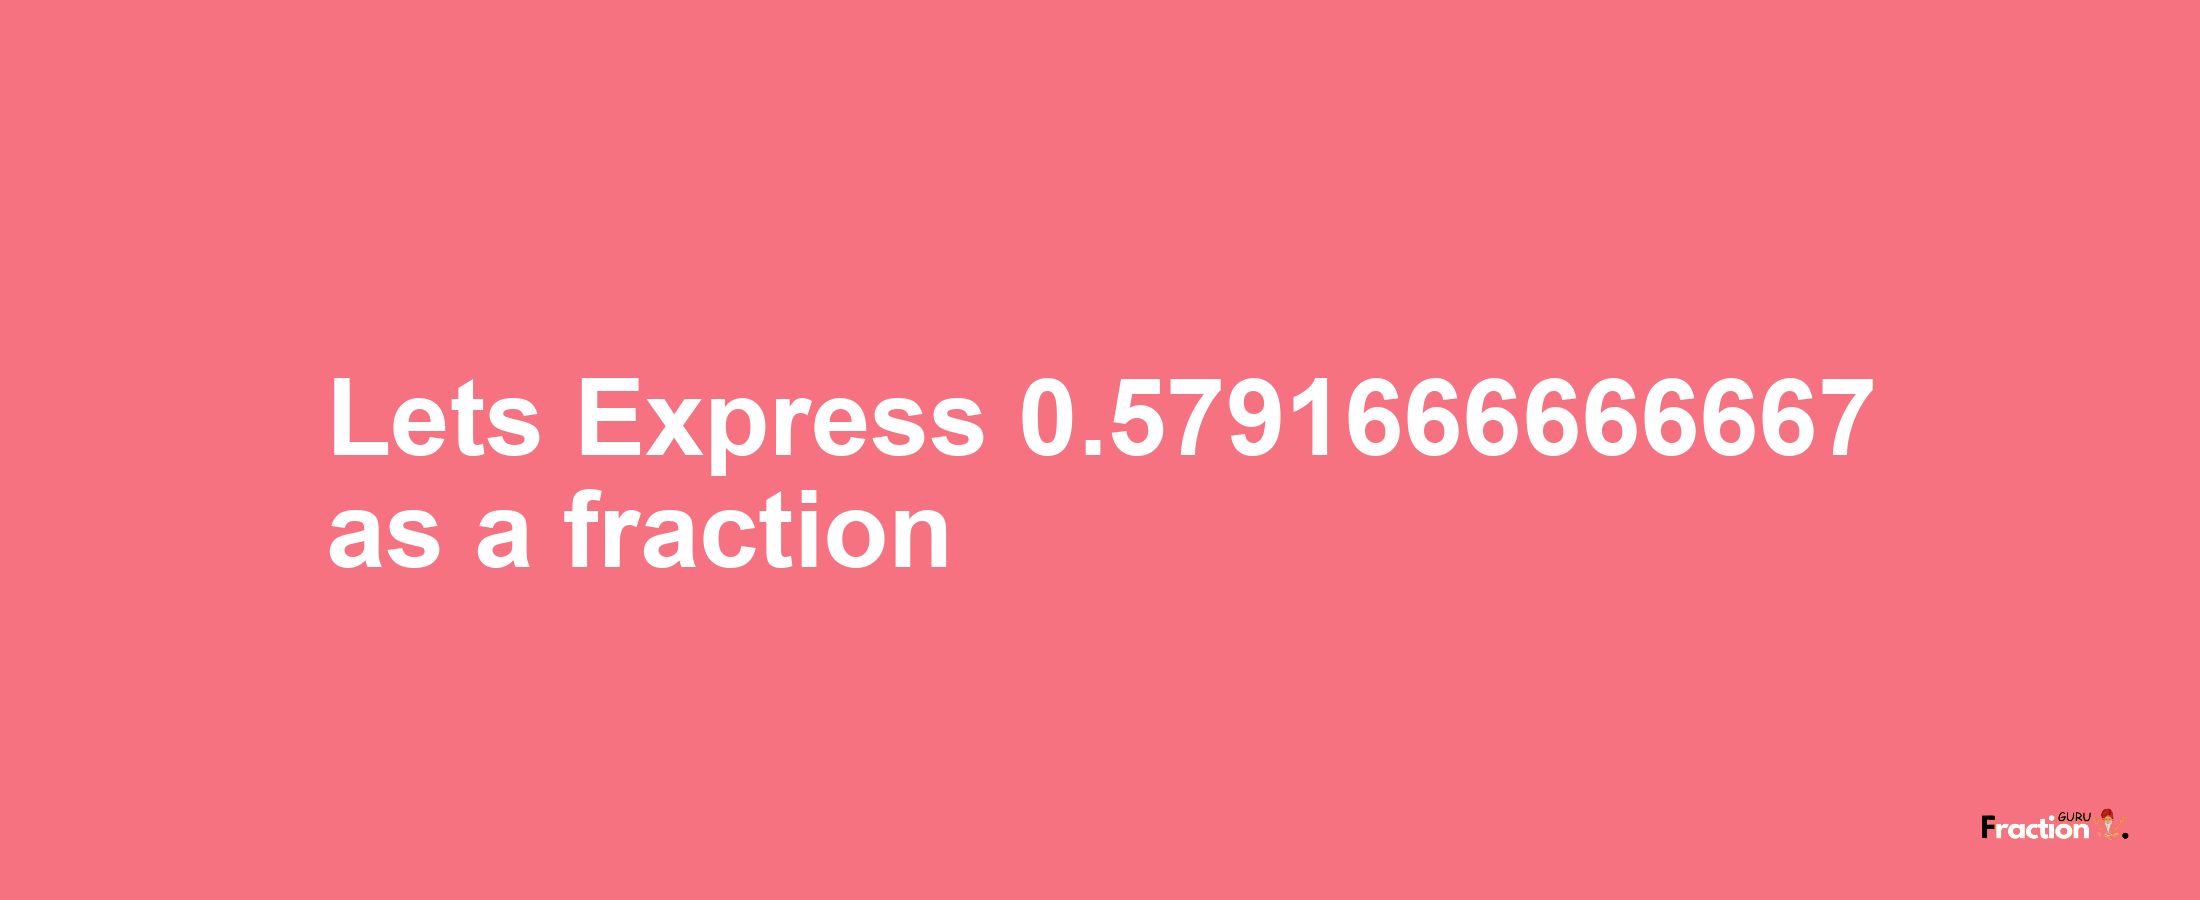 Lets Express 0.5791666666667 as afraction